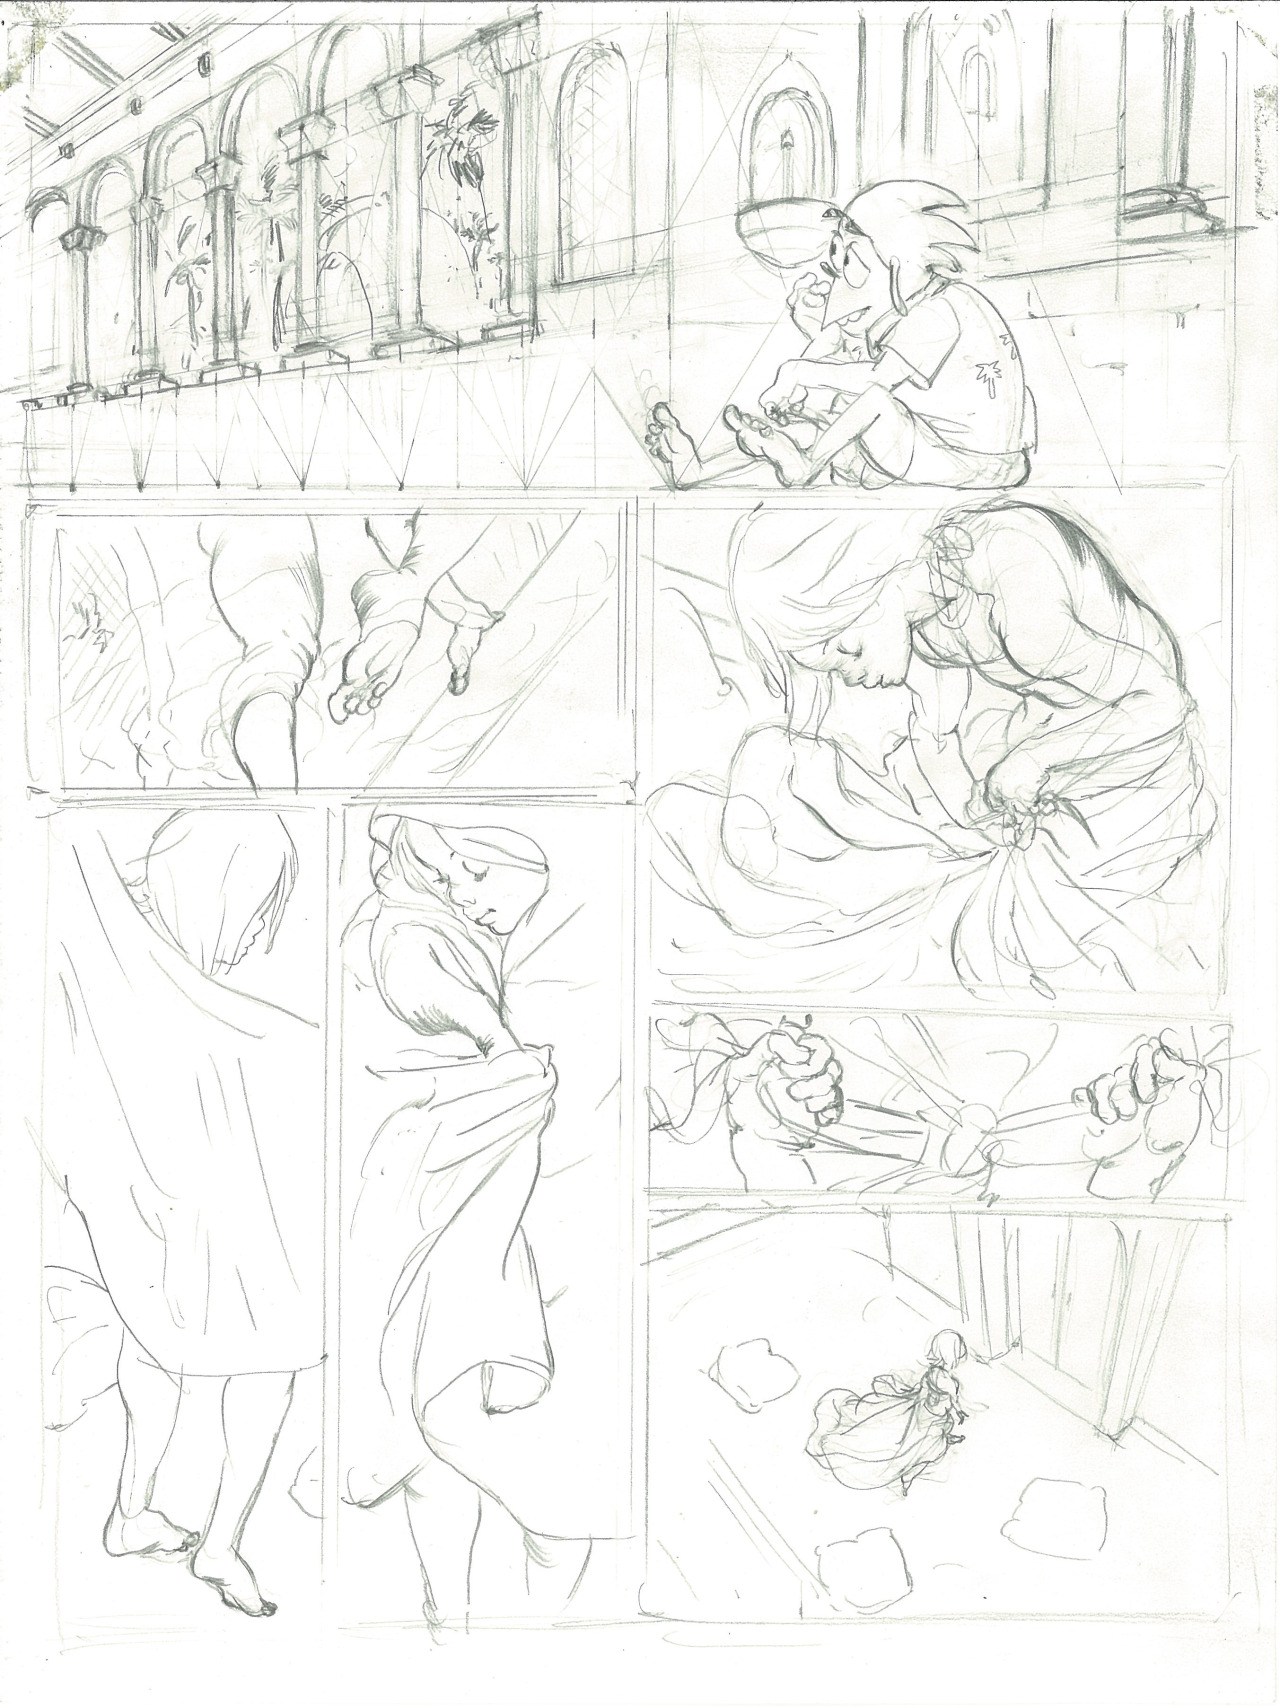 A few more disparate pages from my unfinished comic “Margo in Bed,” from 2010